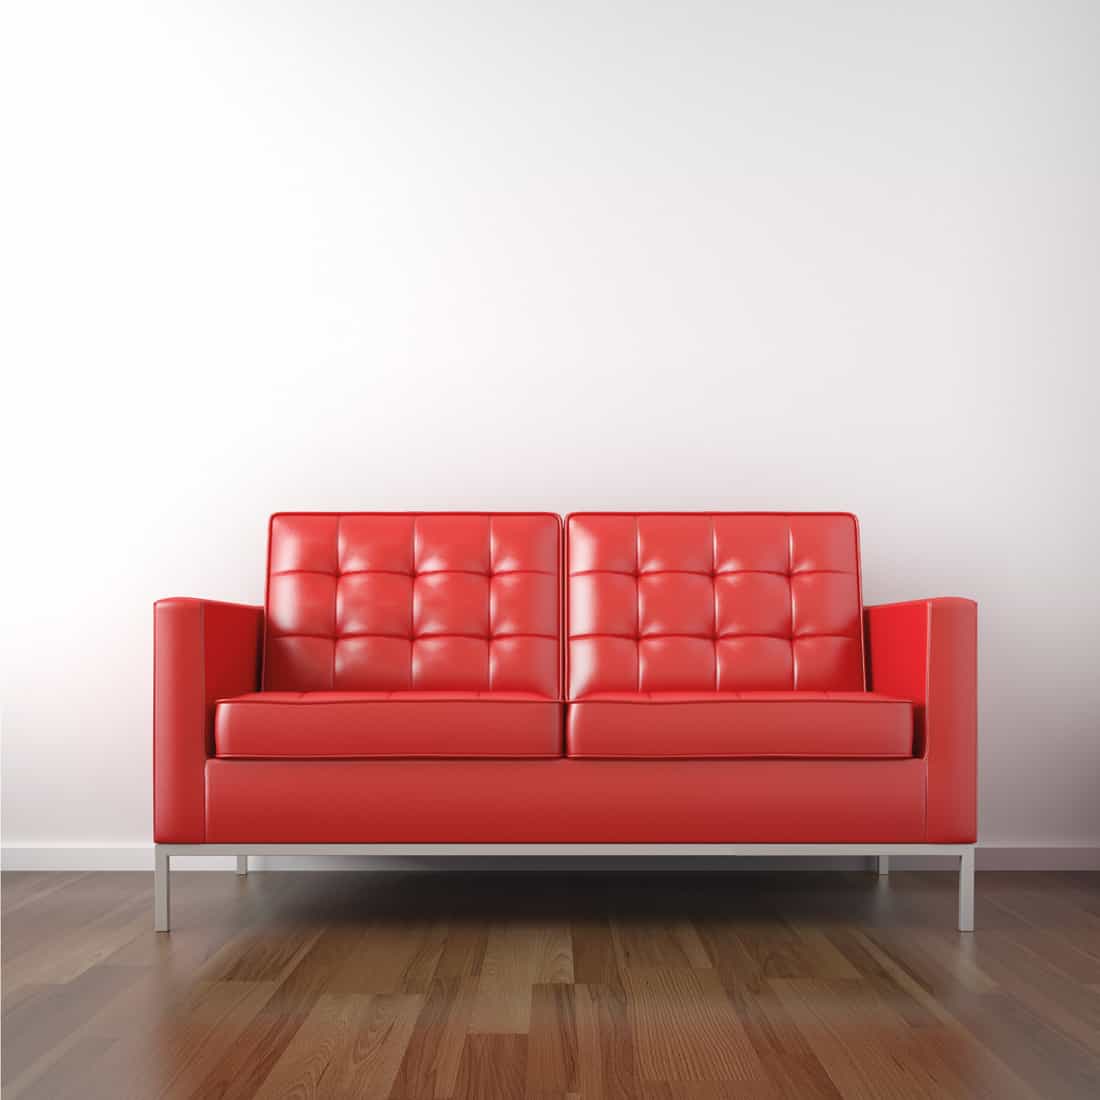 Modern classic red leather sofa in a white room